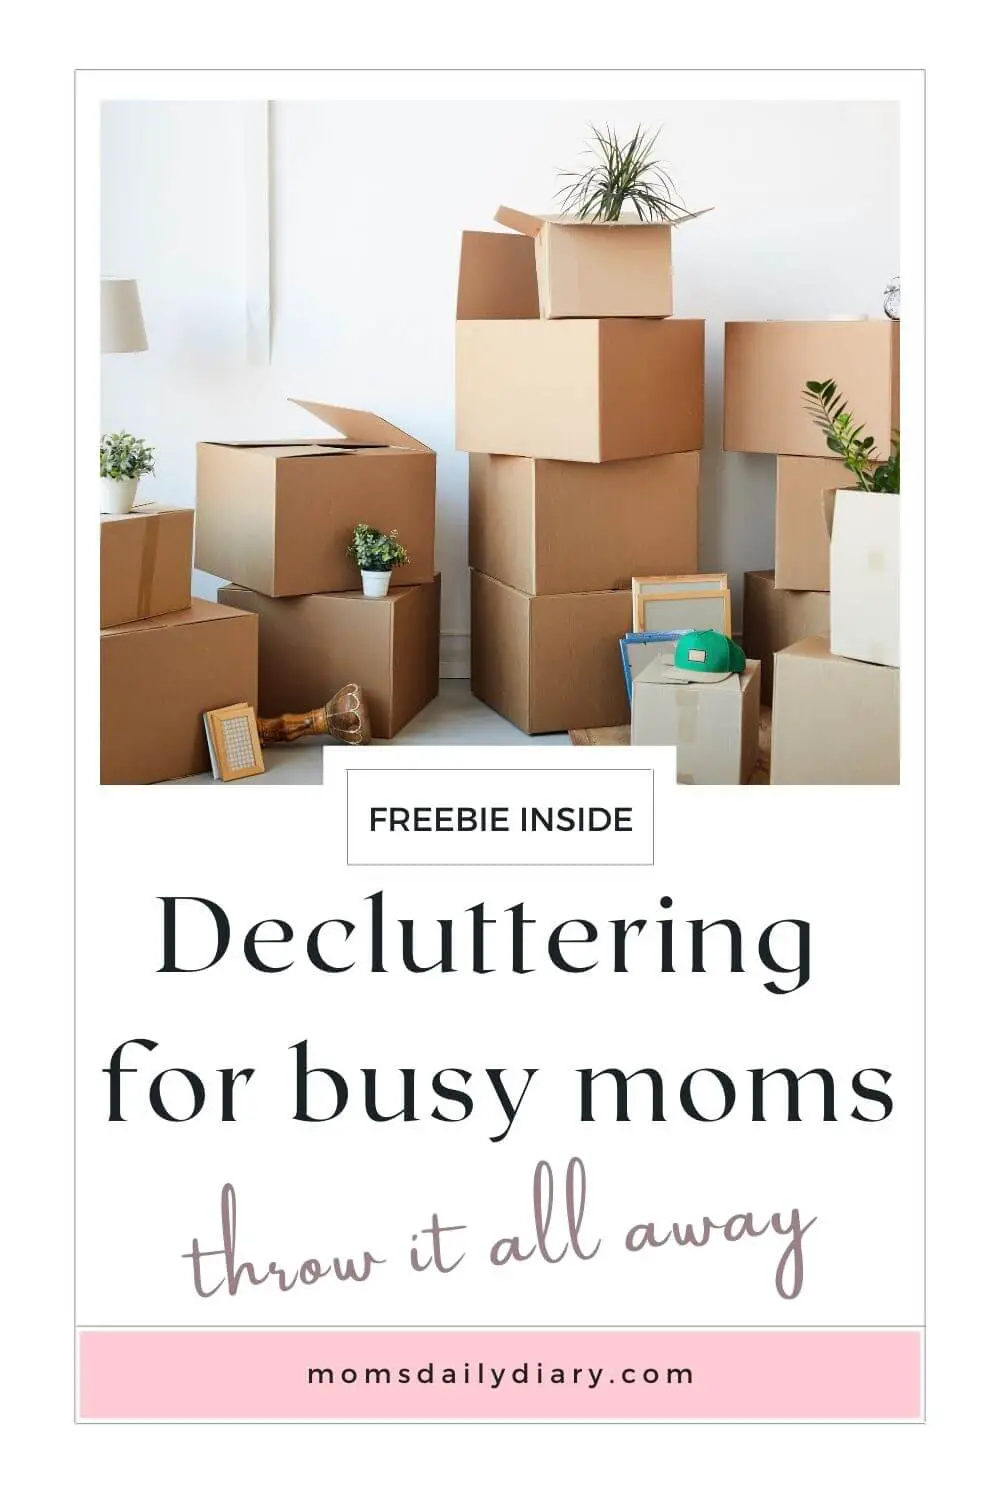 Are you overwhelmed by the amounts of clutter around you? Then this decluttering challenge is for you. Plus there's a cool FREE workbook too!